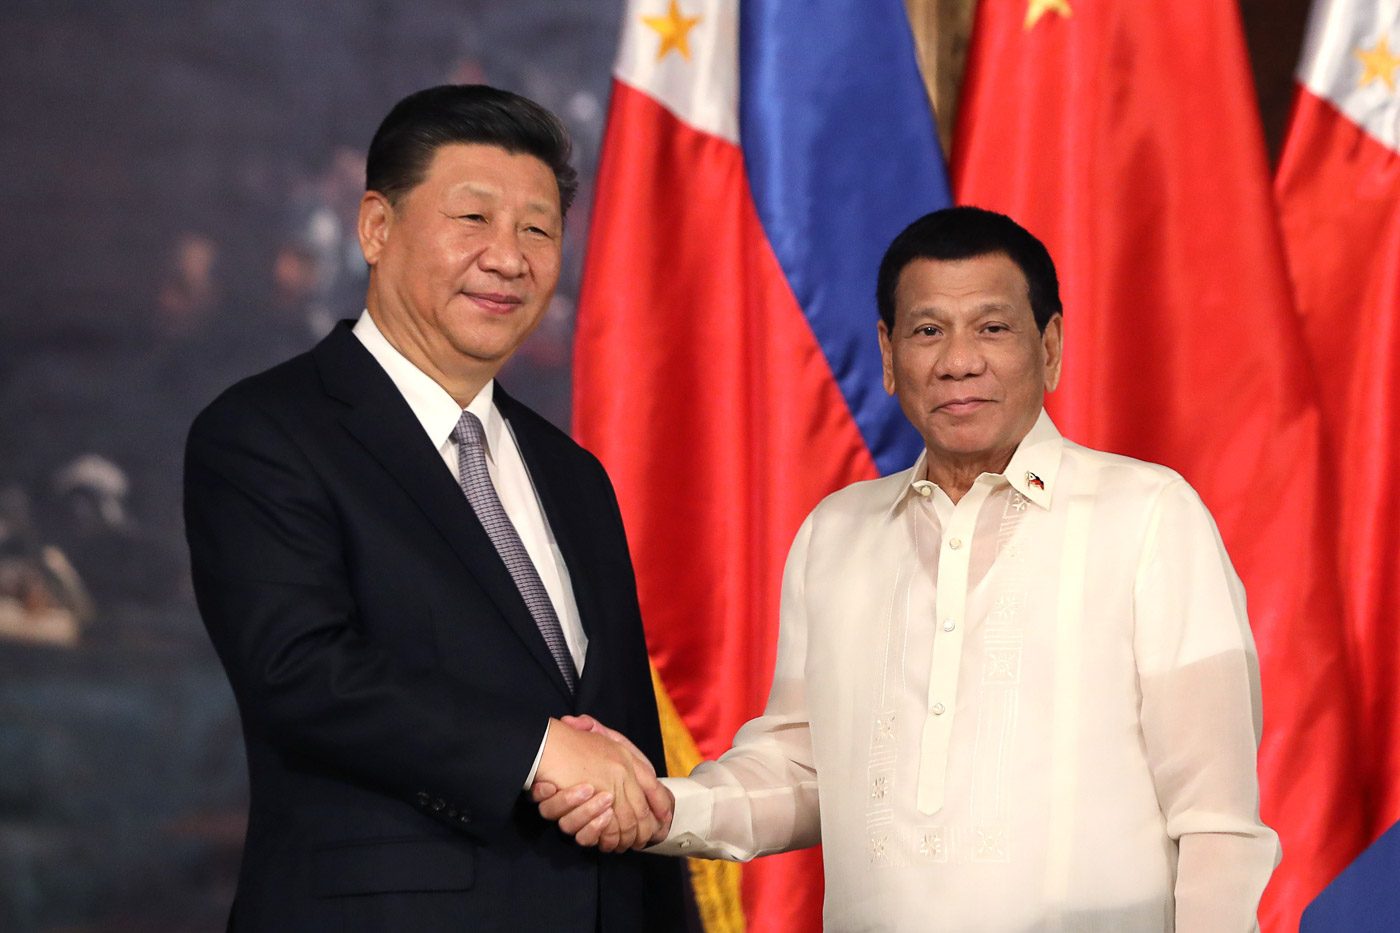 Duterte to speak with Xi Jinping on April 8